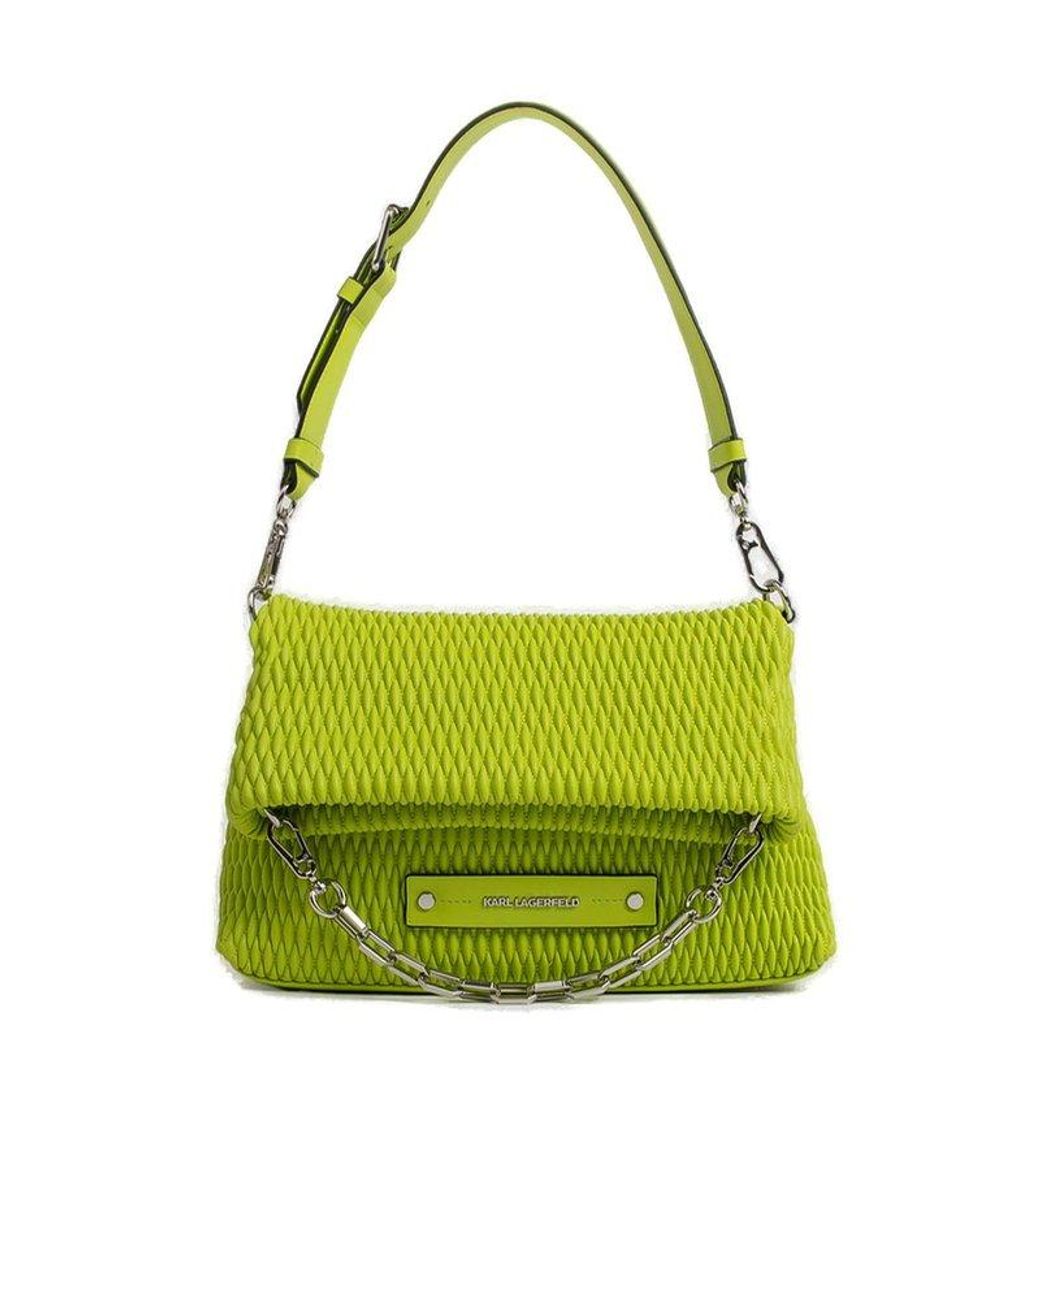 Karl Lagerfeld K/kushion Quilted Folded Tote Bag in Green | Lyst